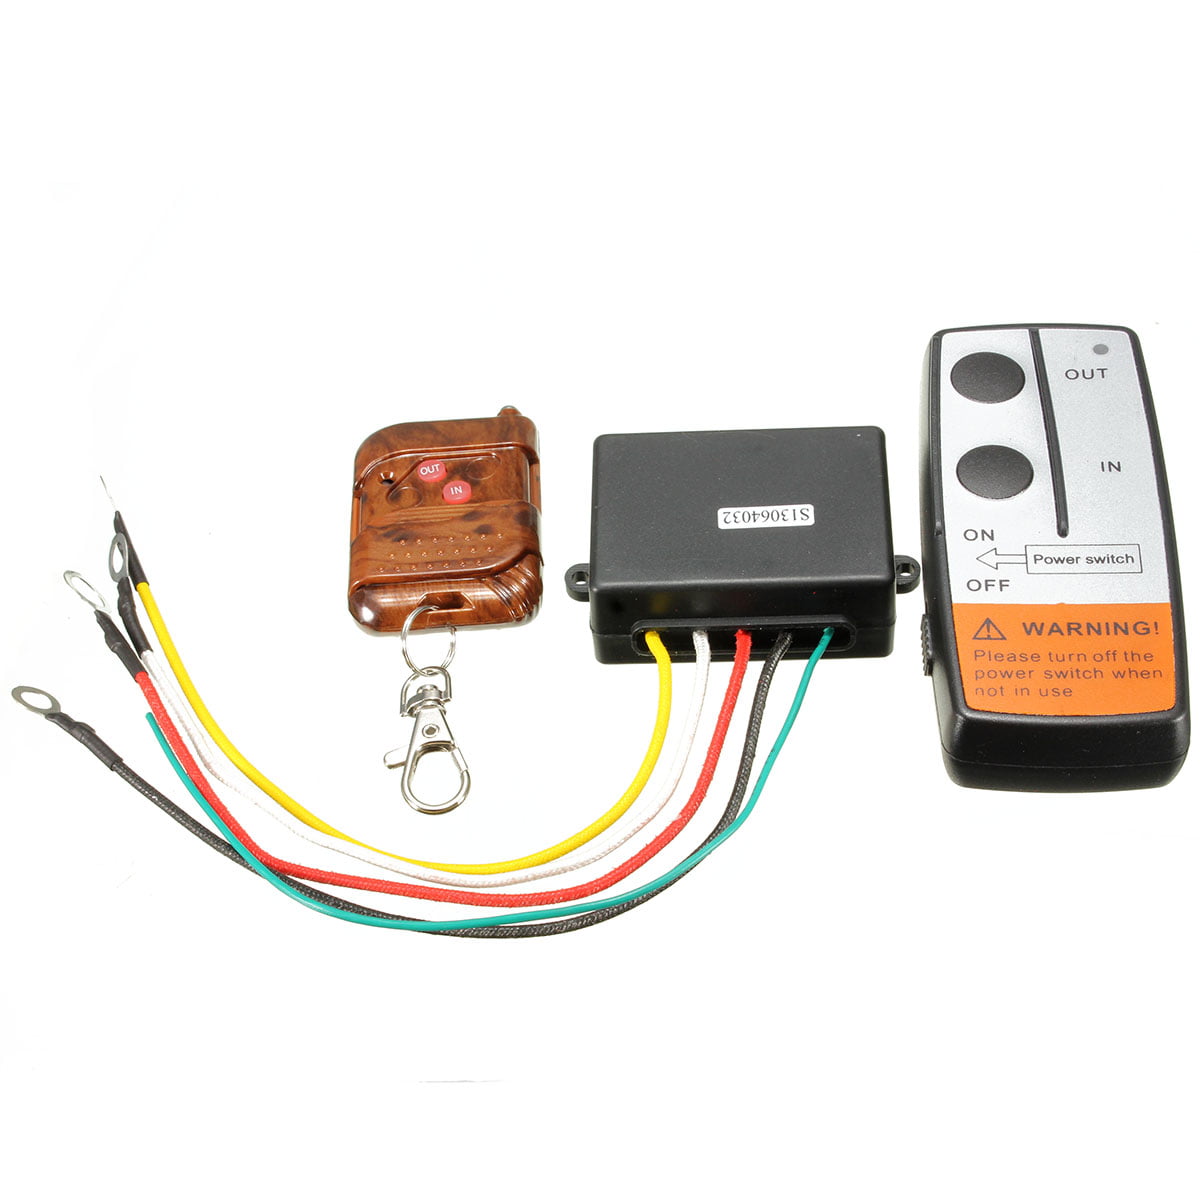 Details about   100ft Wireless Winch Remote Control Kit Heavy Duty 12V For Car Jeep ATV SUV US 